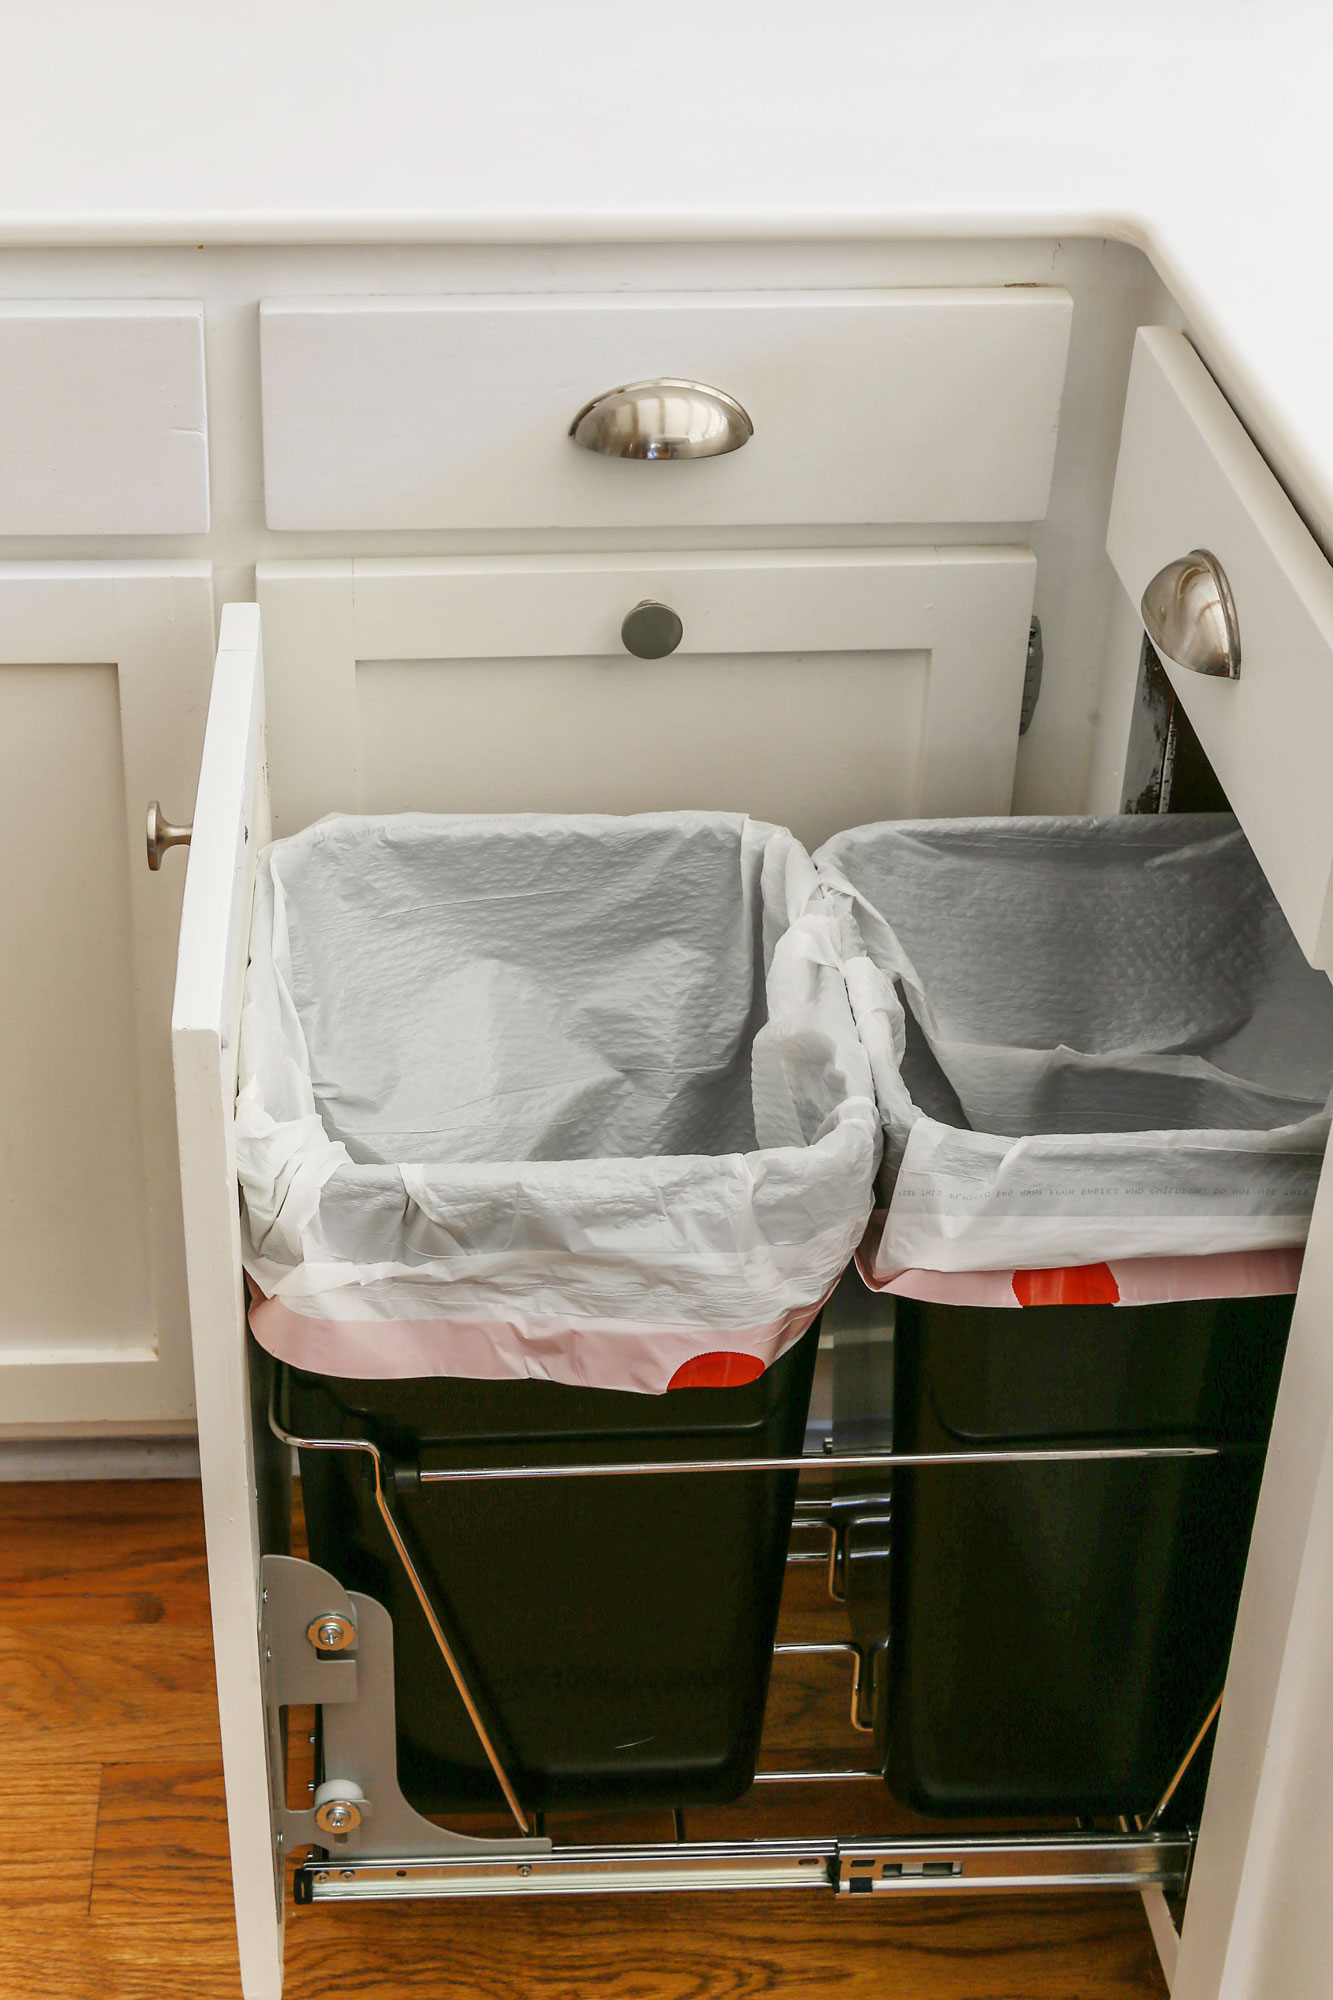 https://designingvibes.com/wp-content/uploads/2022/09/how-to-builld-trash-can-cabinet-9.jpg